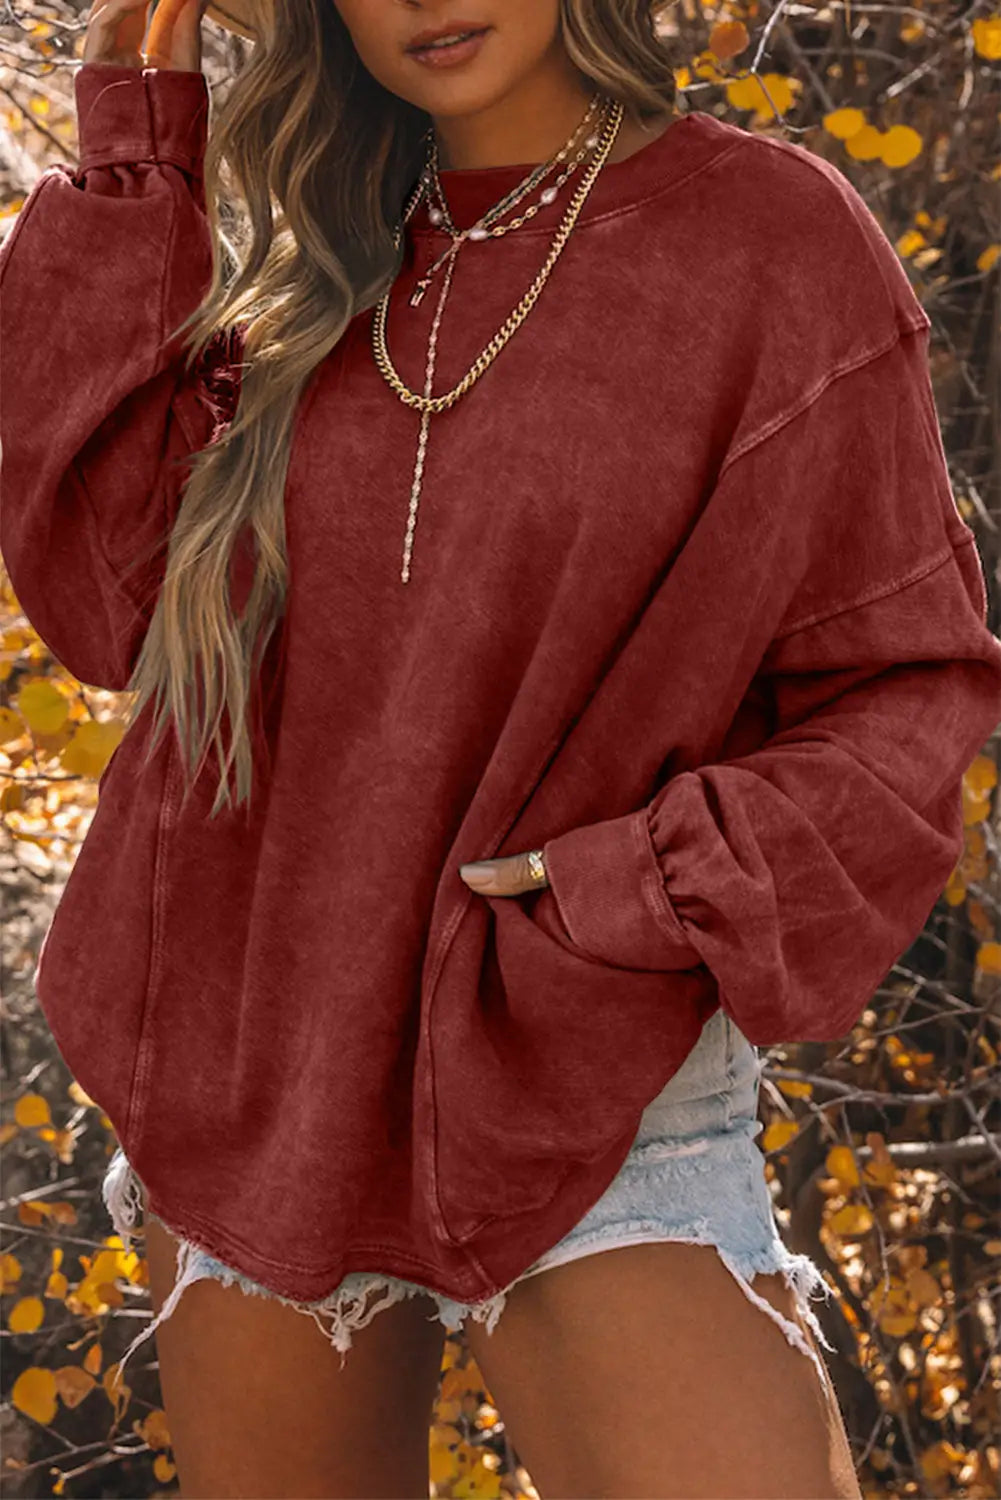 Red exposed seam twist open back oversized sweatshirt - s / 80% polyester + 20% cotton - sweaters & cardigans